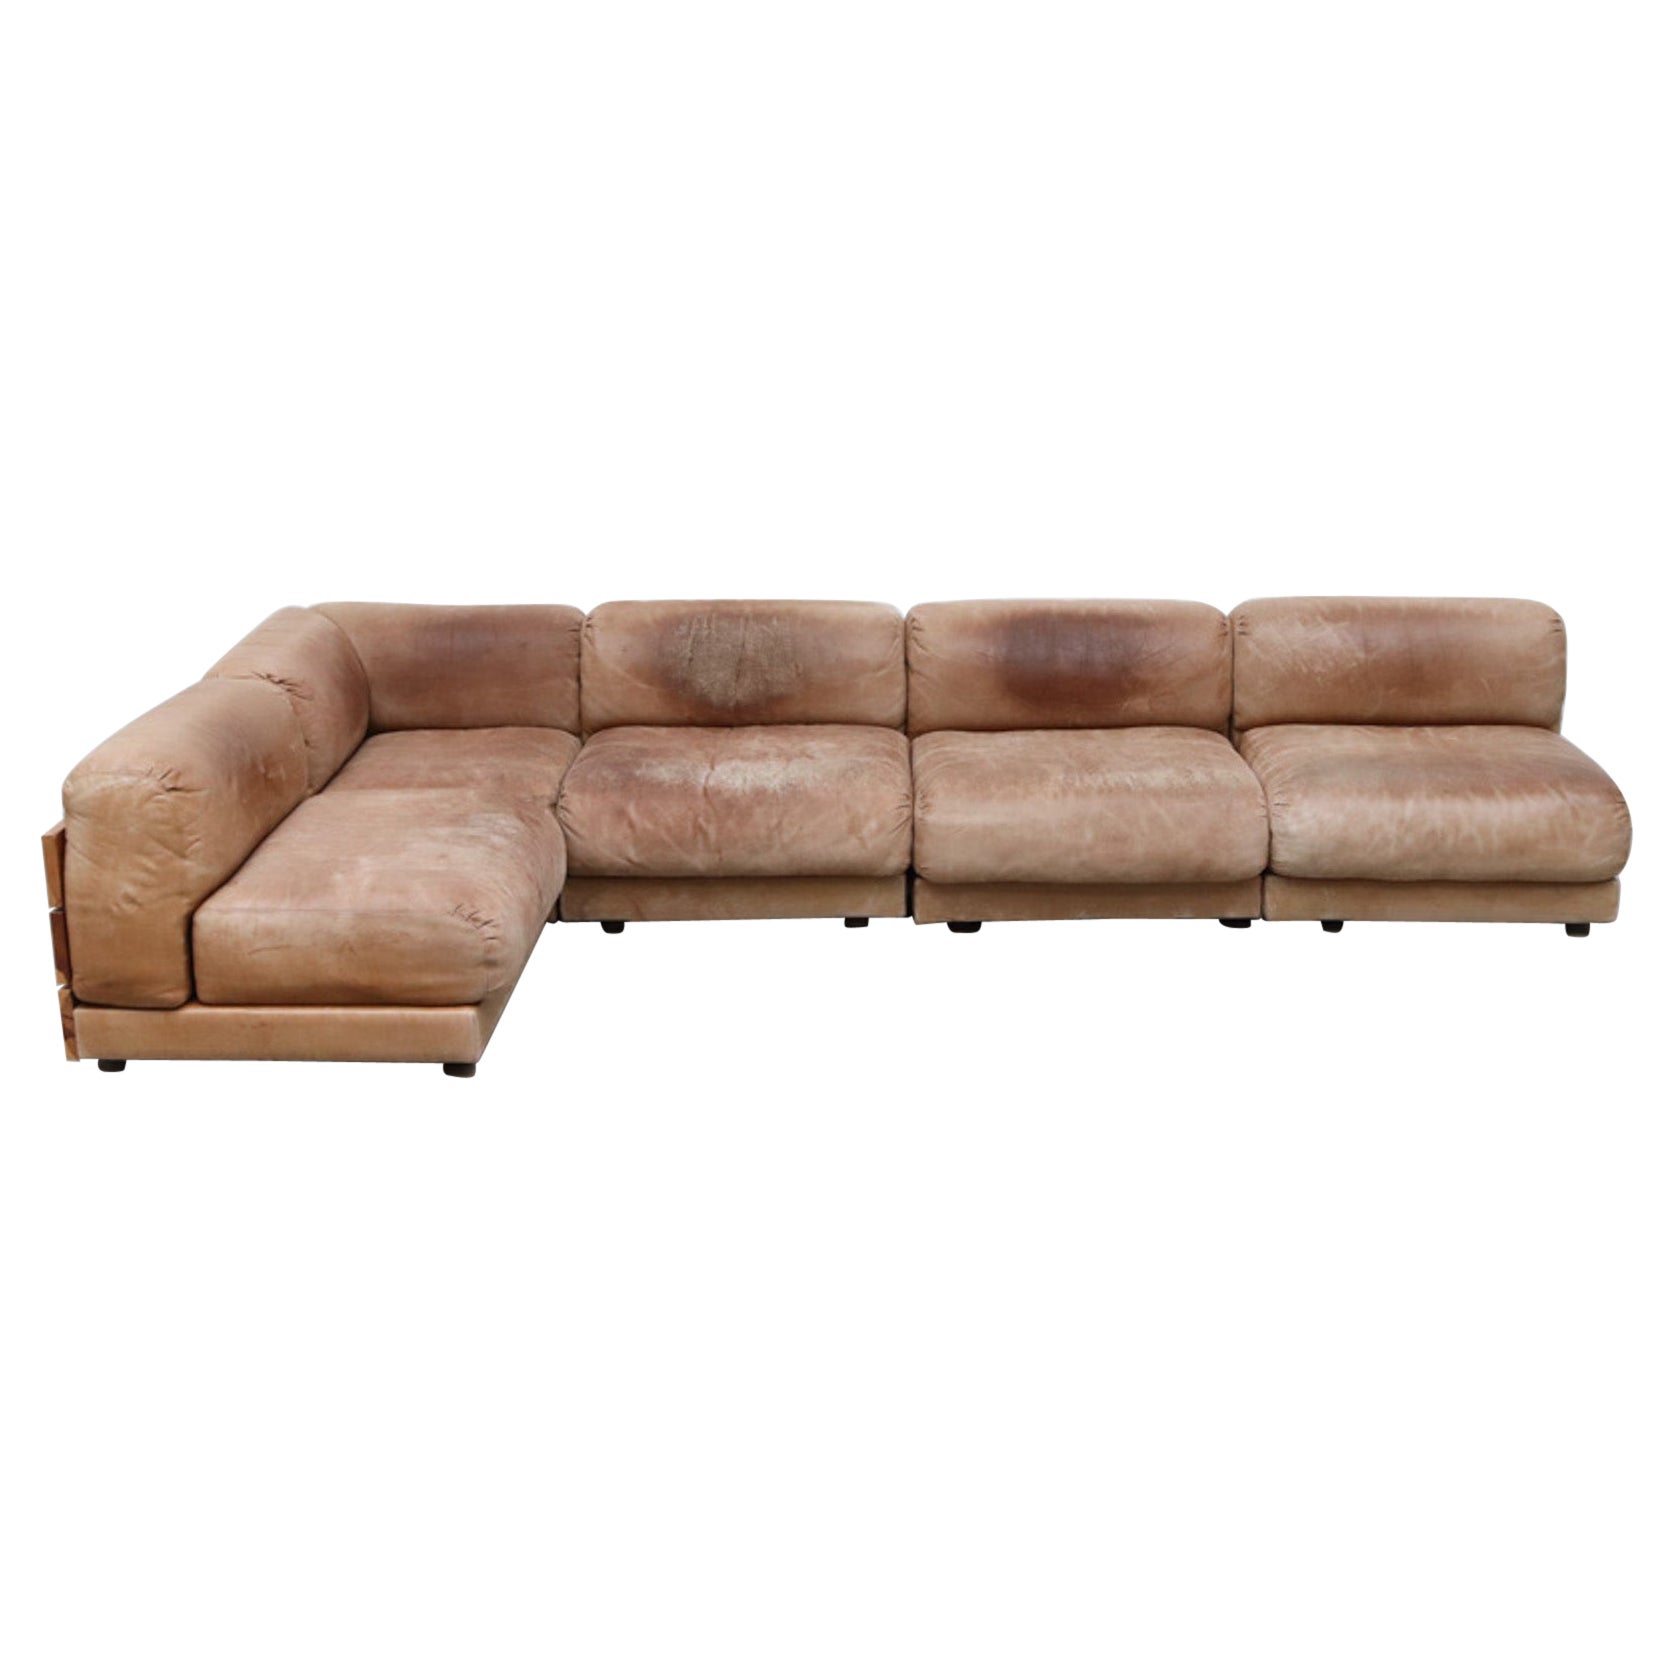 Handsome Dutch Leather and Pine Plank Sectional Sofa